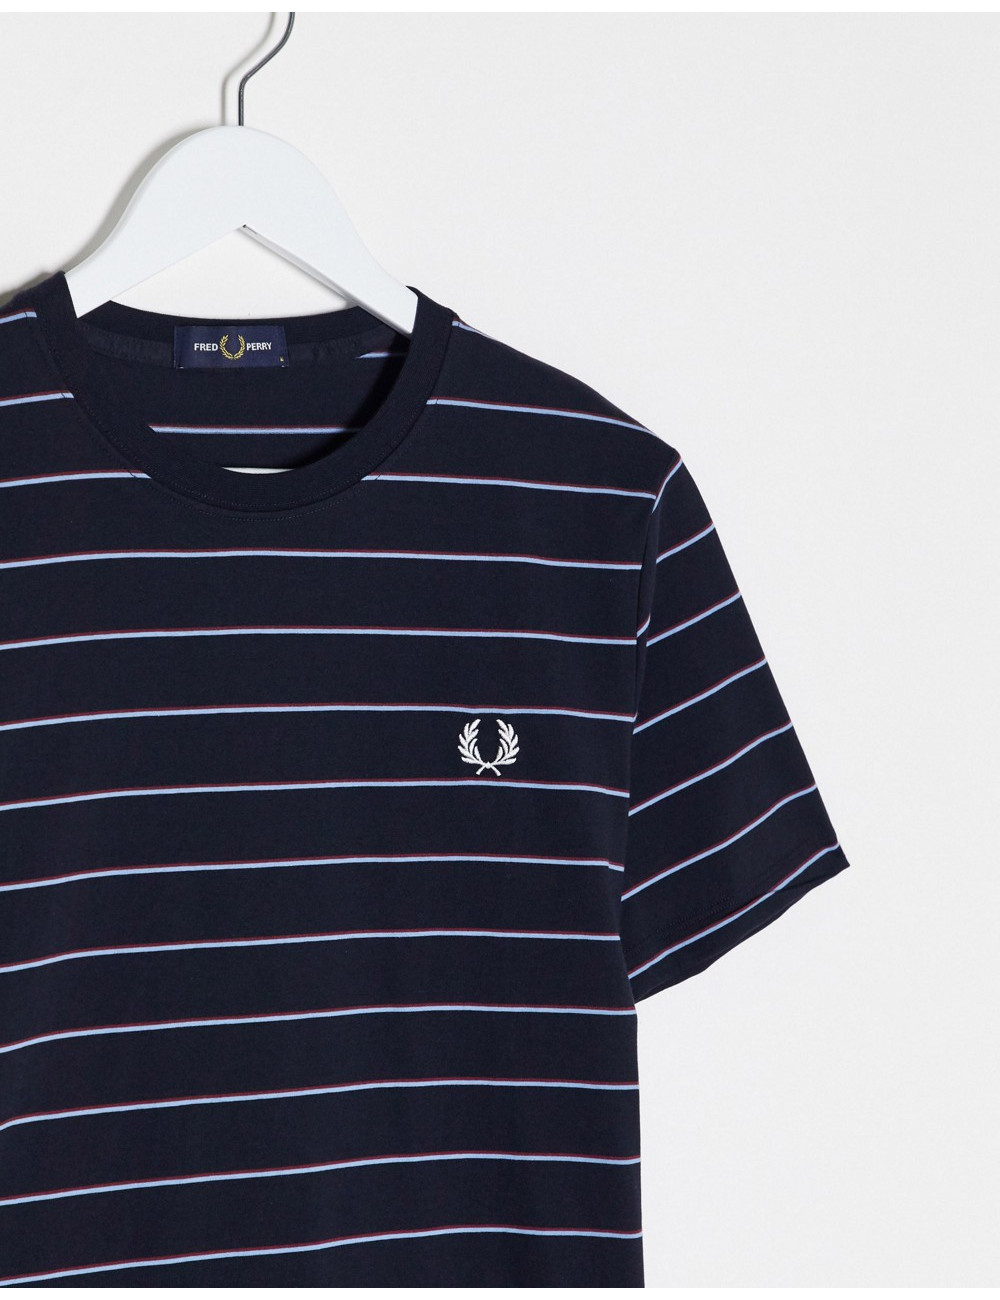 Fred Perry striped t-shirt...